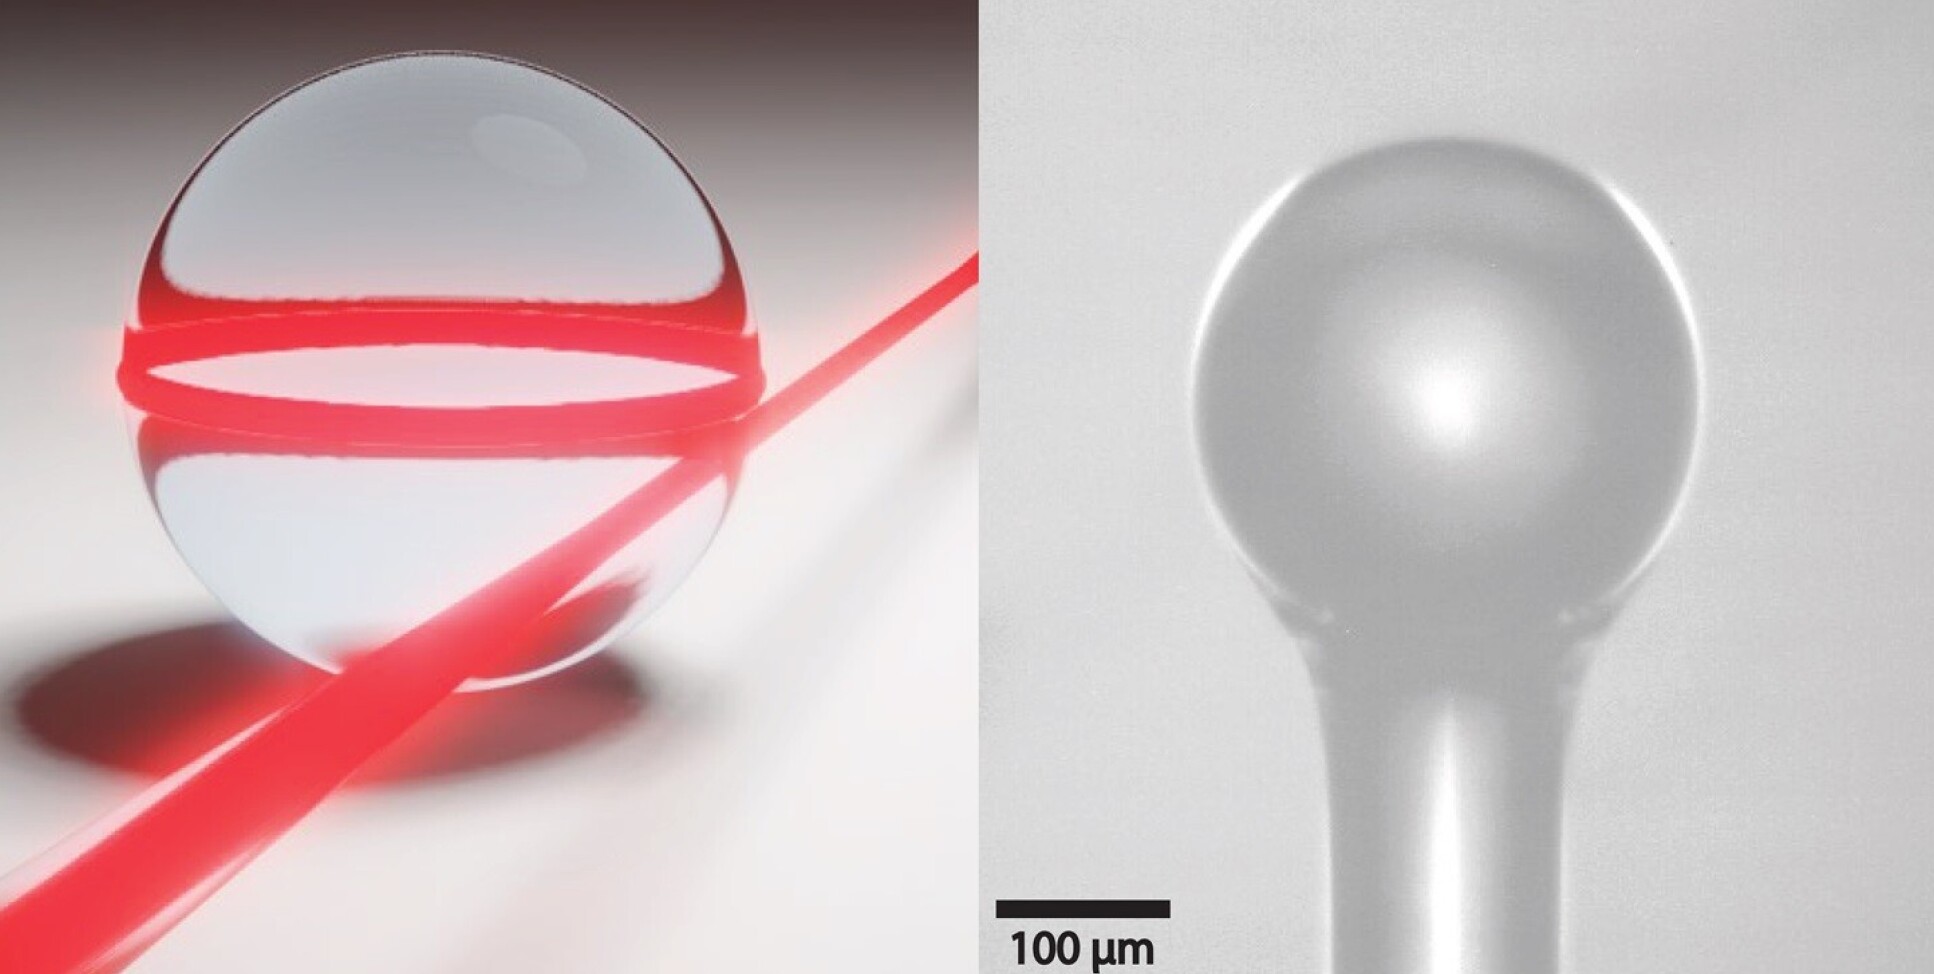 Illustration of a glass ball with a string of red light, and a glass tube with a rounded end